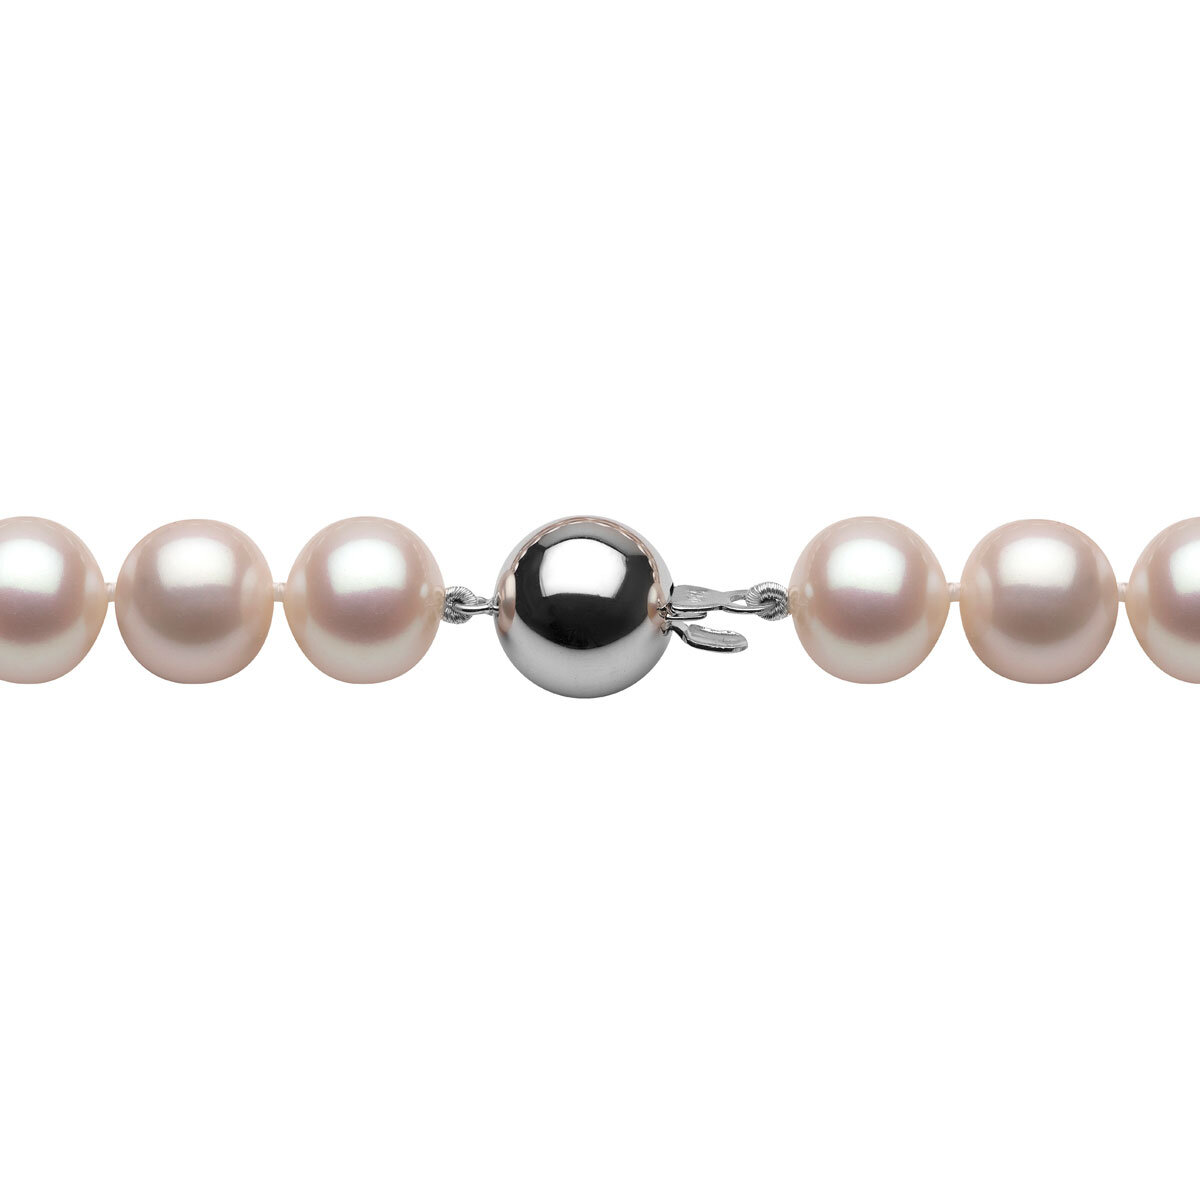 9-9.5mm Cultured Freshwater White Pearl Bracelet, 18ct White Gold